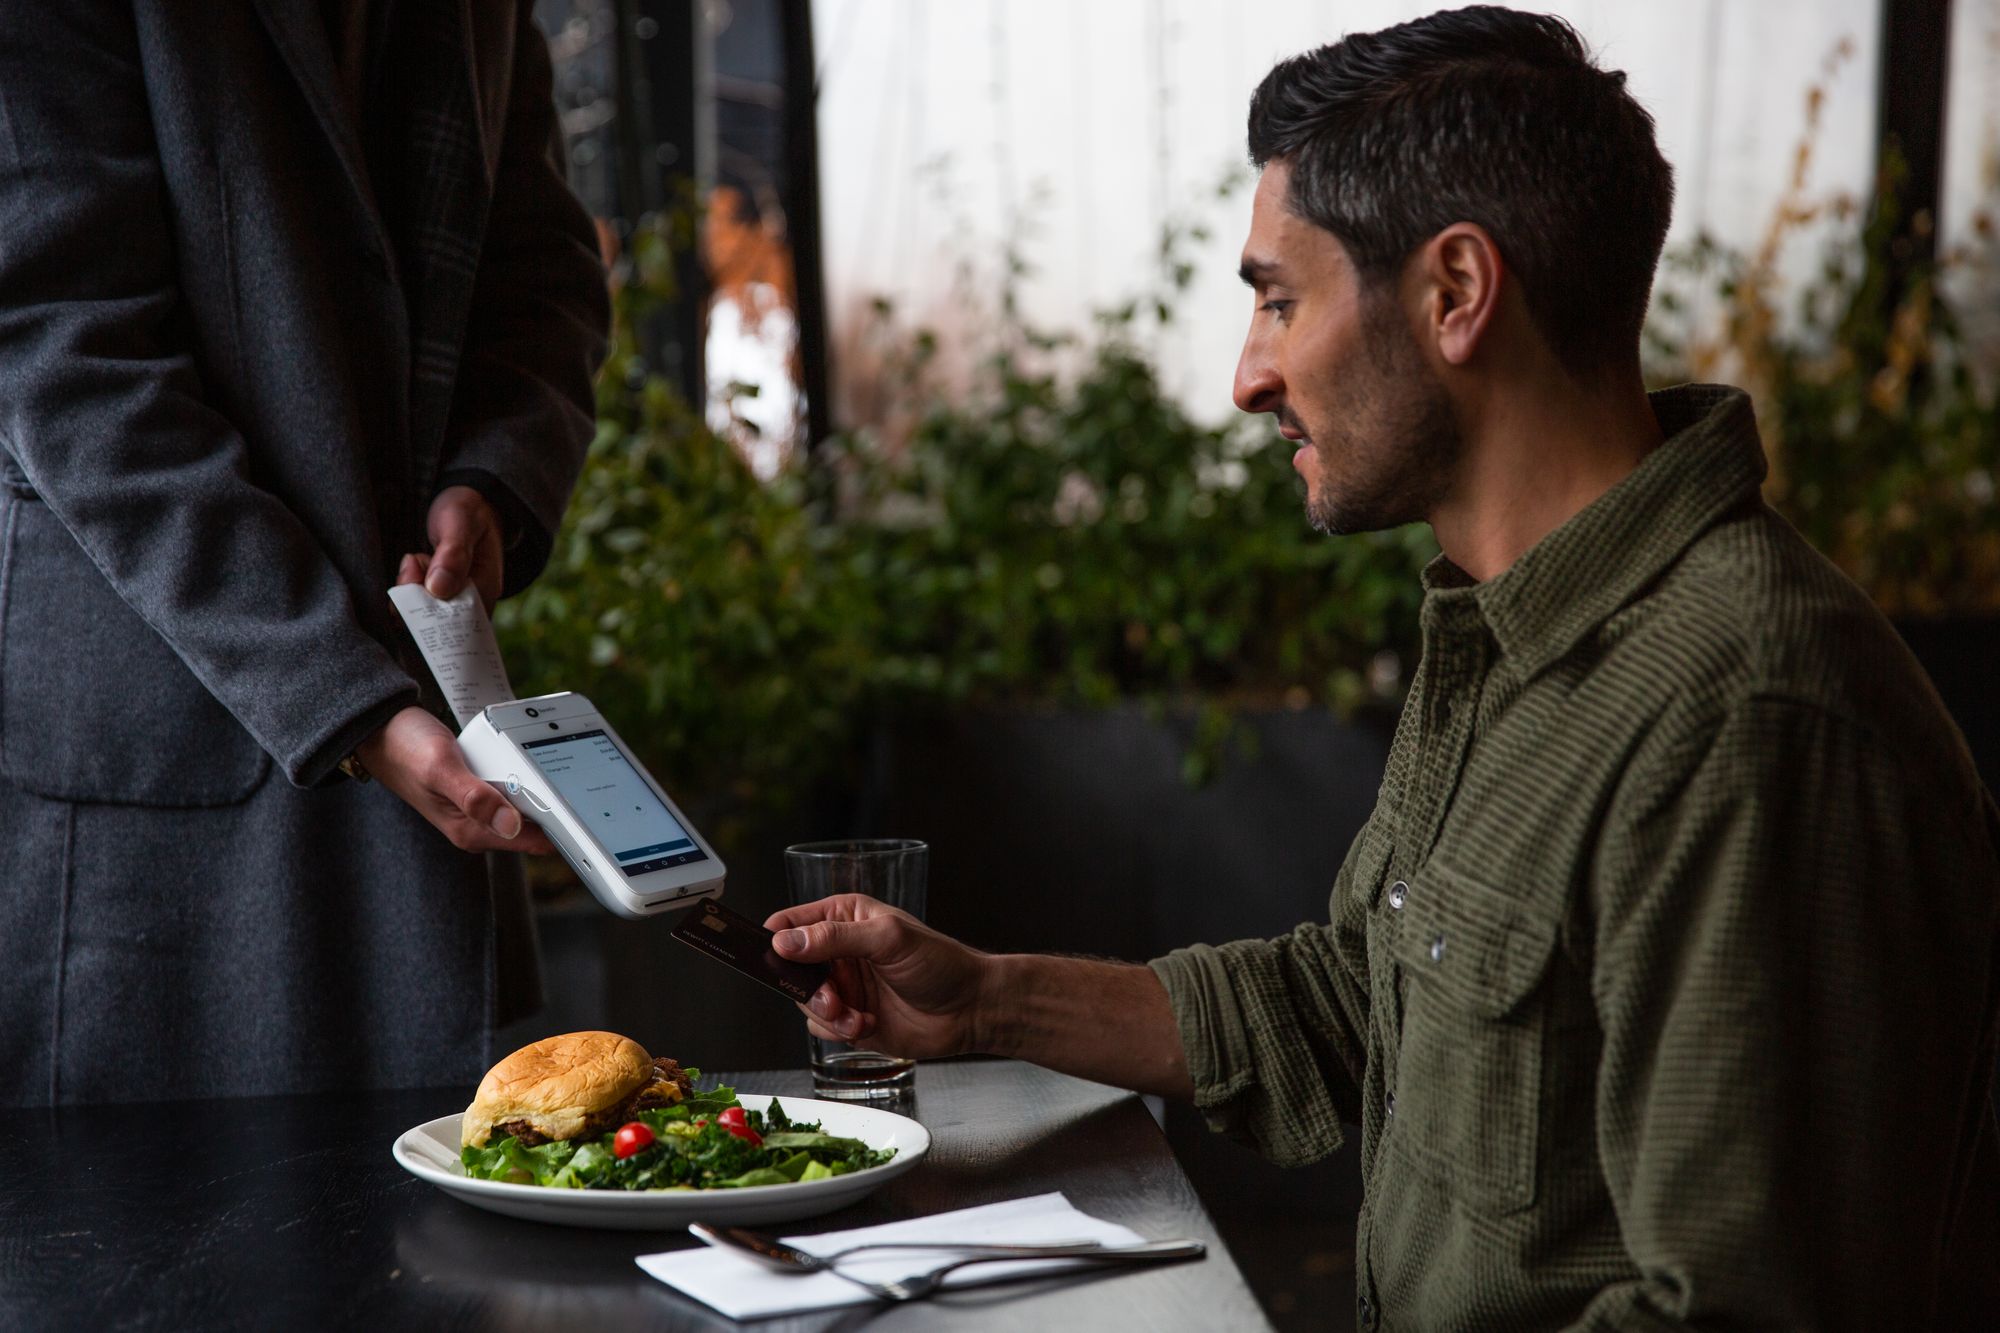 A restaurant server holds a handheld device for a guest to pay at the table.